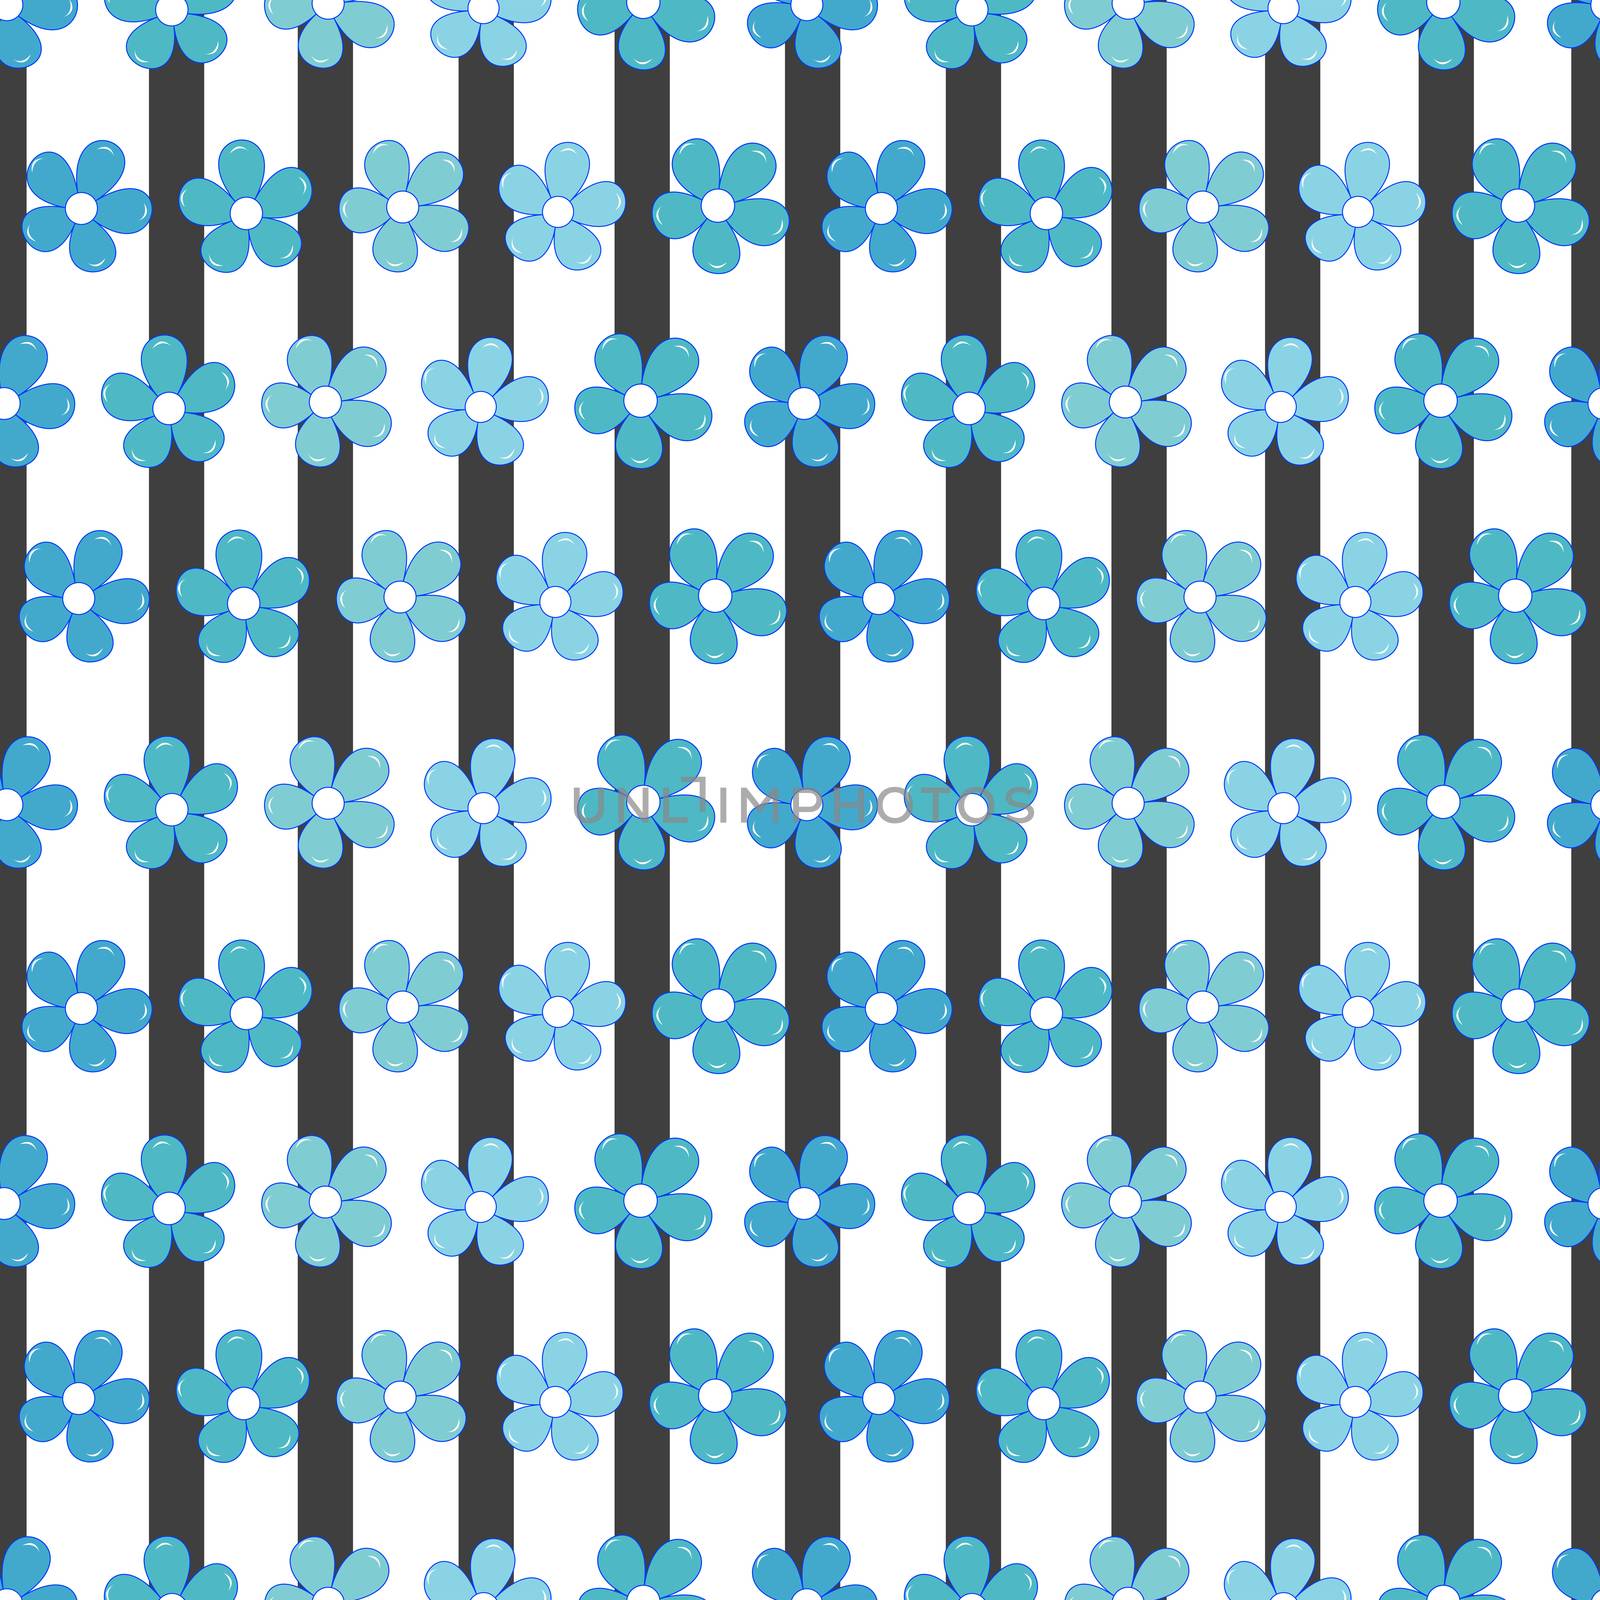 Seamless pattern with blue flowers and black stripes on white background